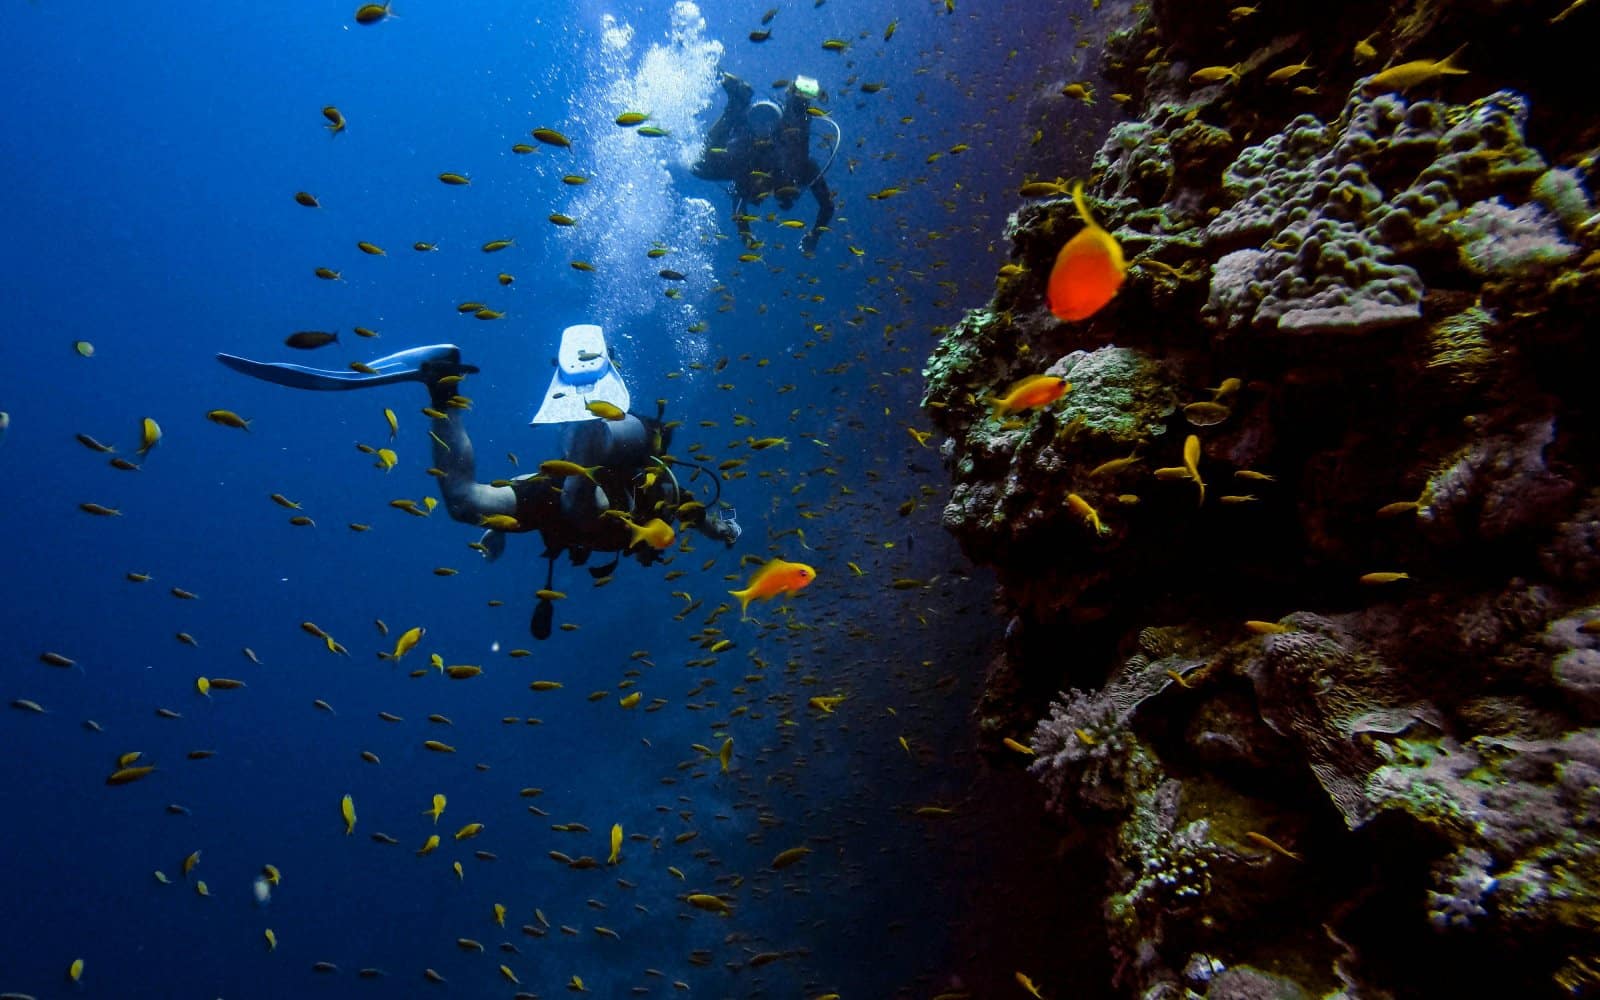 <p class="wp-caption-text">Image Credit: Pexels / Aviv Perets</p>  <p><span>The PADI Open Water Diver course is the world’s most popular scuba certification, marking your entry into the global community of divers. This course teaches you the fundamental knowledge and skills needed to dive independently, up to a depth of 18 meters/60 feet, with a buddy. The curriculum is divided into three main sections: Knowledge Development, to understand basic principles of scuba diving; Confined Water Dives, to learn basic scuba skills; and Open Water Dives, to use your skills and explore.</span></p> <p><span>You’ll learn to set up your scuba gear, manage buoyancy, navigate underwater, and deal with potential problems. The course is typically conducted over four to five days and includes dives in open-water settings, allowing students to experience a variety of diving conditions.</span></p> <p><b>Insider’s Tip:</b><span> When selecting a location for your Open Water Diver course, consider destinations known for clear waters and abundant marine life. This makes the learning process more enjoyable and enriches your initial diving experiences. Additionally, inquire about the instructor-to-student ratio to ensure you receive personalized attention, enhancing your learning outcome and overall satisfaction with the course.</span></p>